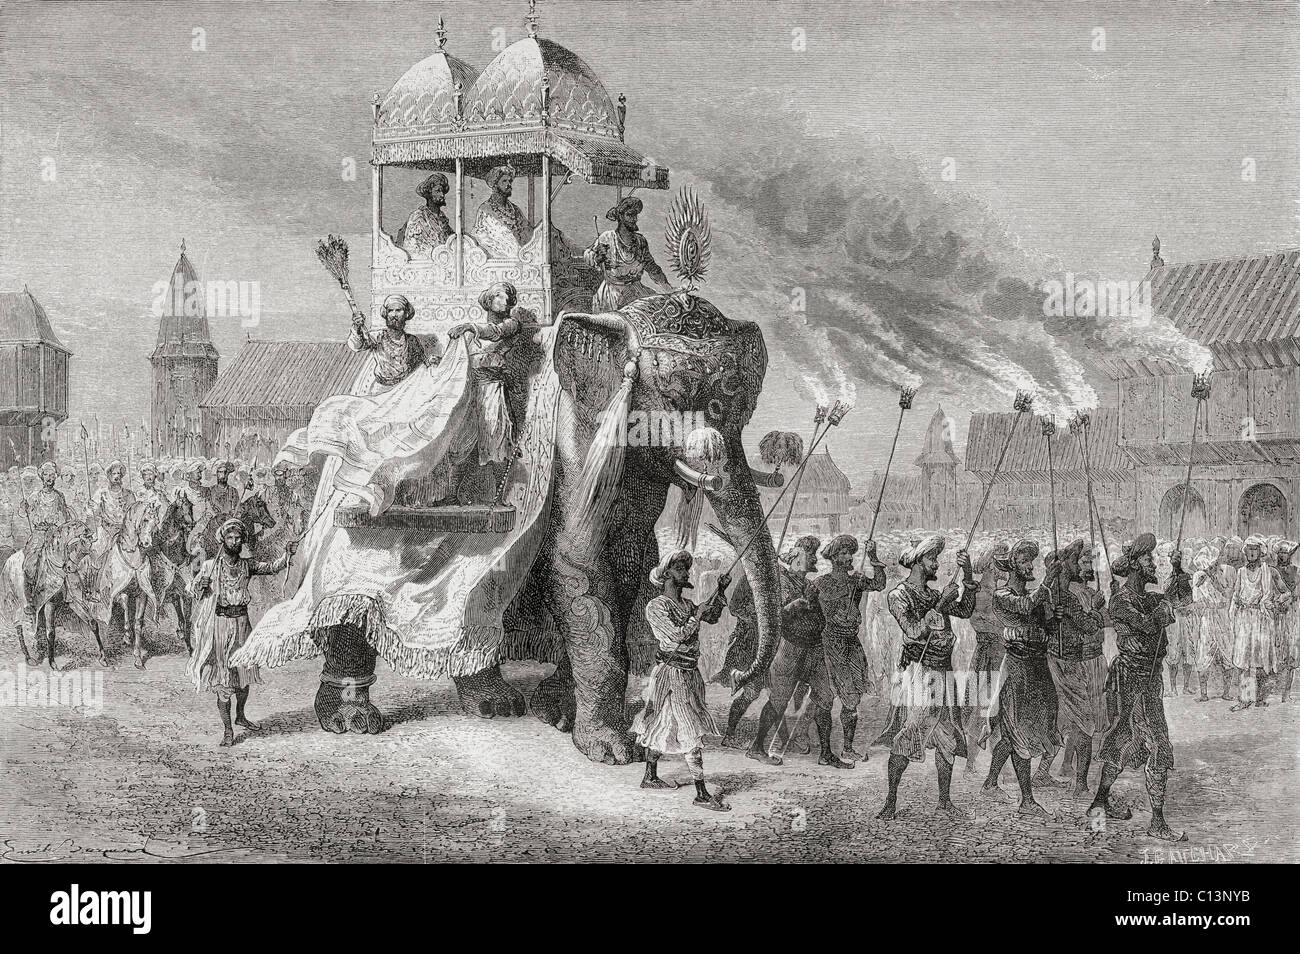 The Maharaja of Baroda, India, riding an elephant in a procession in the 19th century. Stock Photo